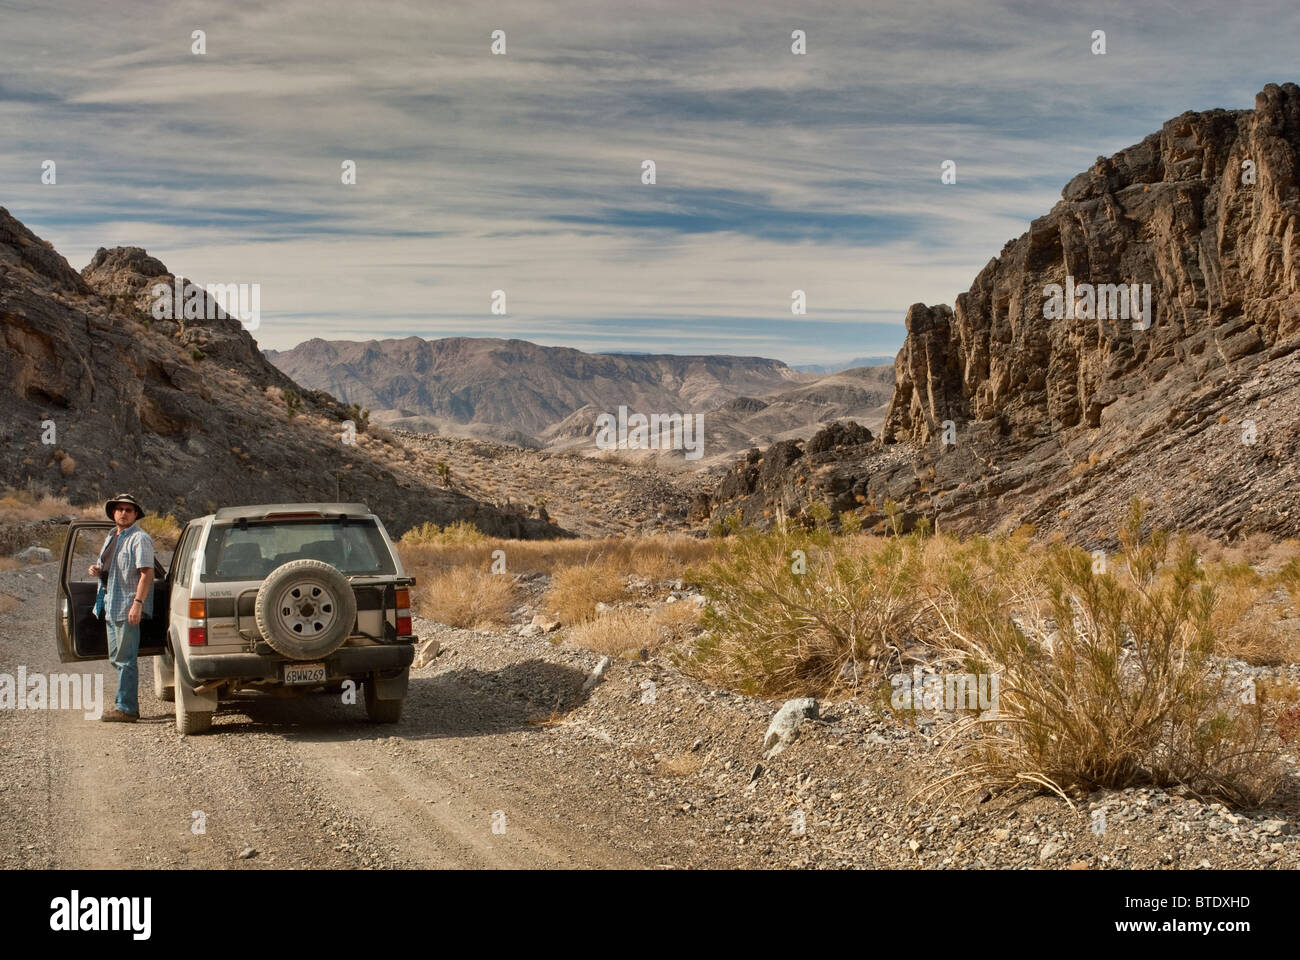 Traveler and 4WD vehicle at Hidden Valley Road at Mojave Desert in Death Valley National Park, California, USA Stock Photo